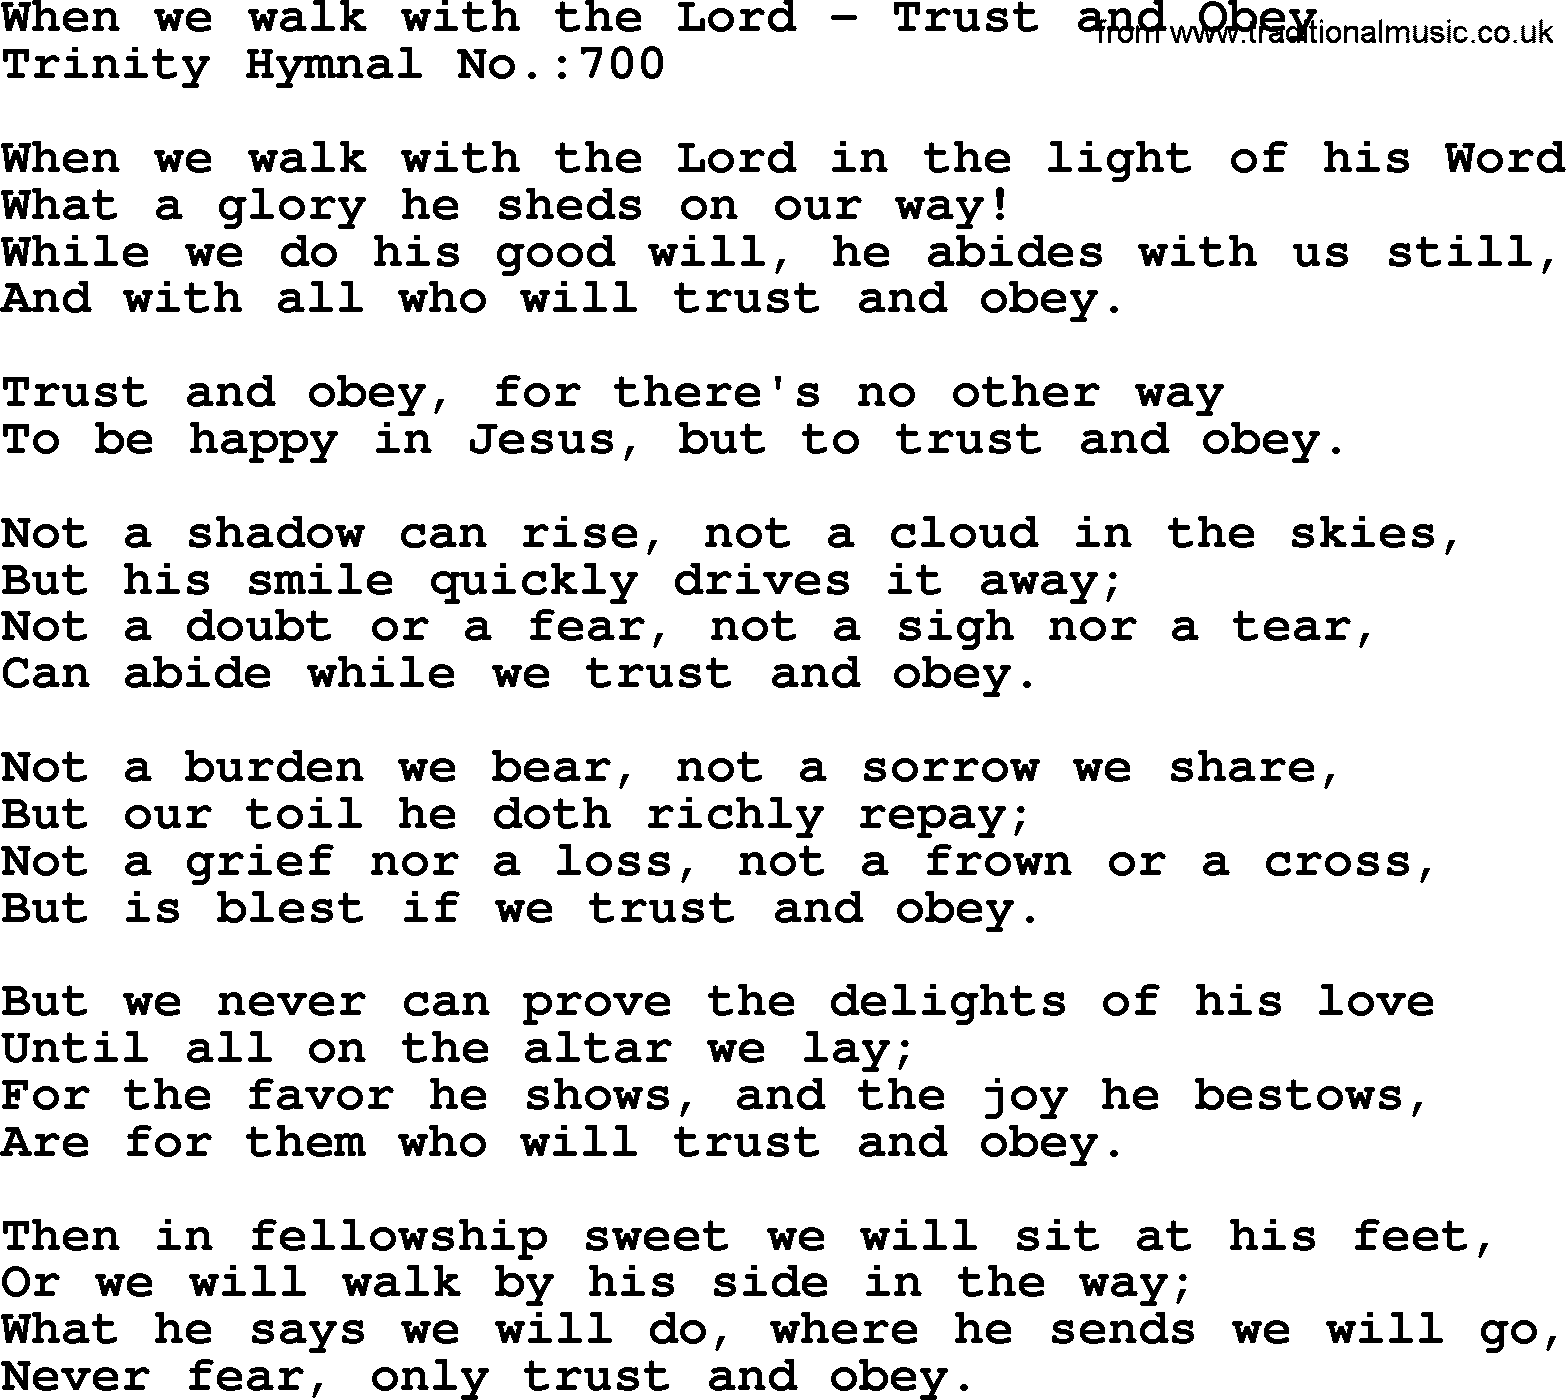 Trinity Hymnal Hymn: When We Walk With The Lord--Trust And Obey, lyrics with midi music